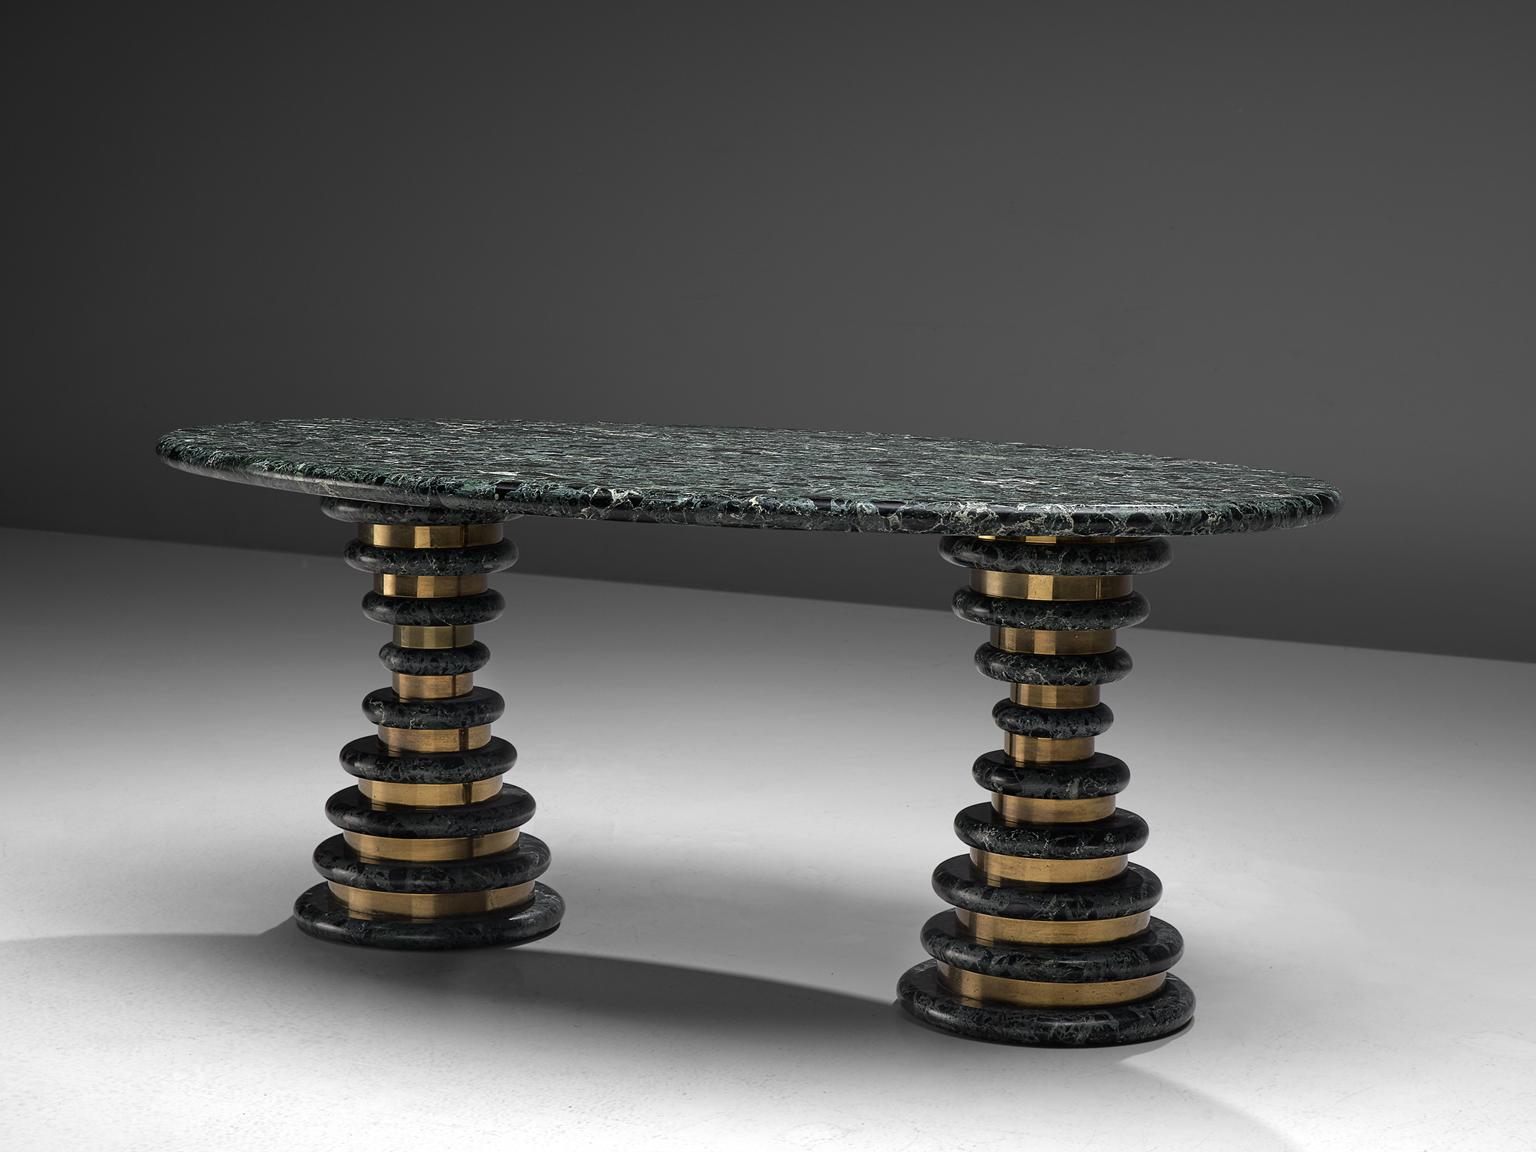 Marzio Cecchi for Studio Most, centre table, in green marble and brass, Italy, 1960s.

Very special green marble table designed by Marzio Cecchi. The design of this table is from the 1960s and haven't been produced at large-scale. This kind of